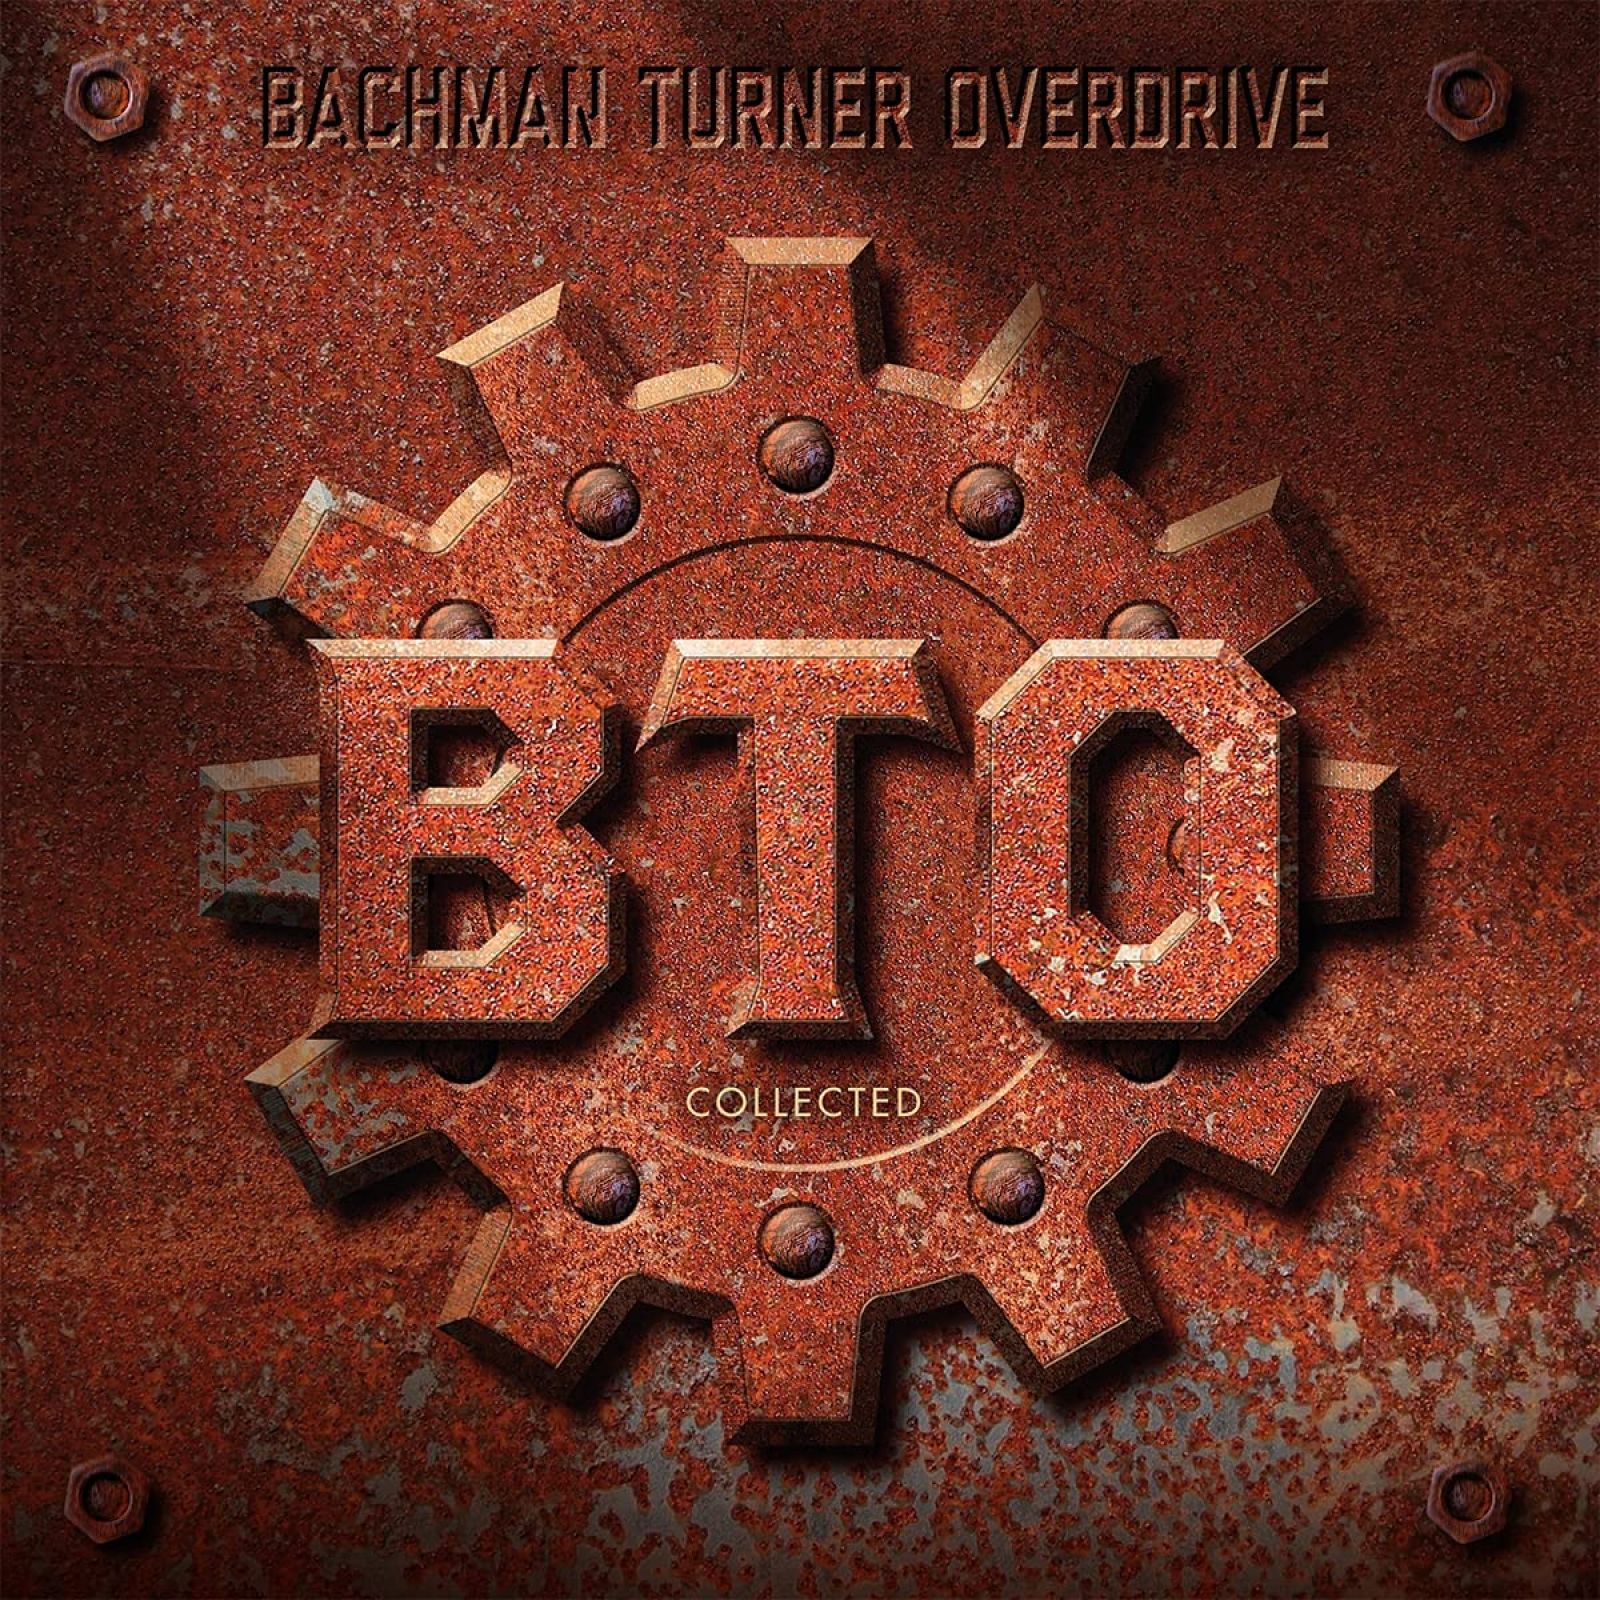 bachman turner overdrive виниловая пластинка bachman turner overdrive king biscuit flower hour 1974 live radio broadcast Виниловая пластинка Bachman Turner Overdrive, Collected: Greatest Songs (0600753911327)